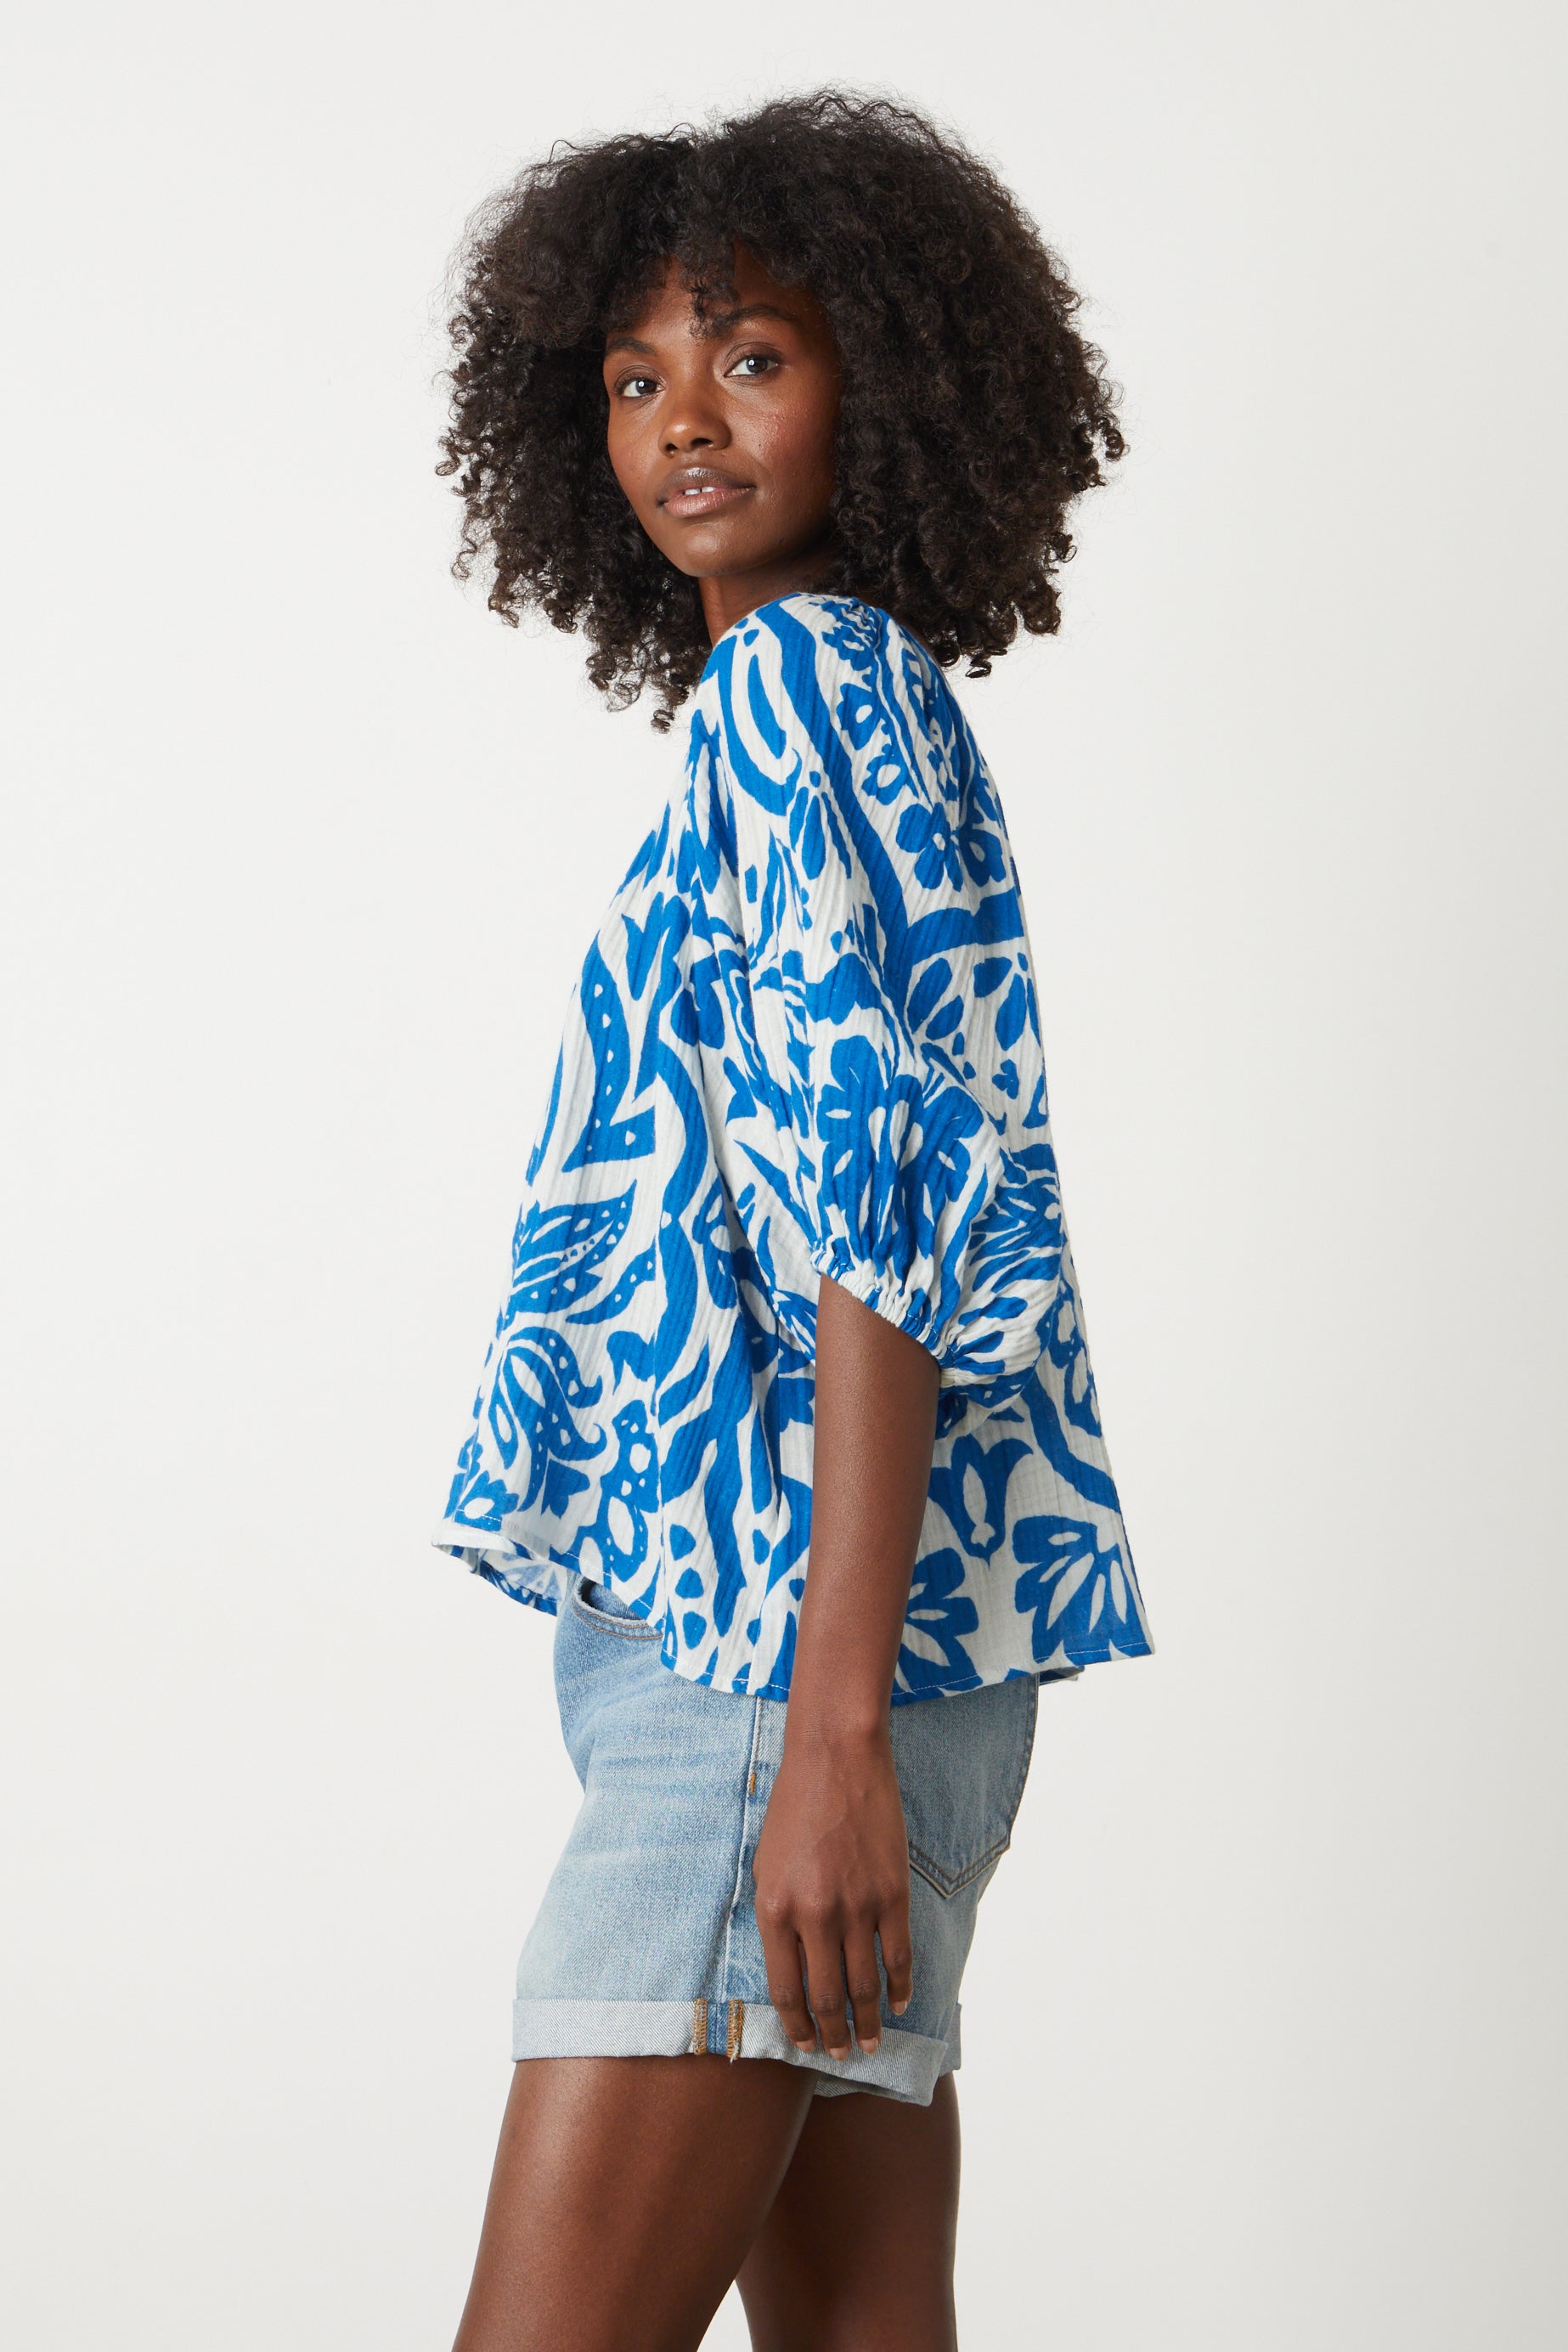   The model is wearing a Velvet by Graham & Spencer CANDICE PRINTED COTTON GAUZE TOP in blue and white floral. 